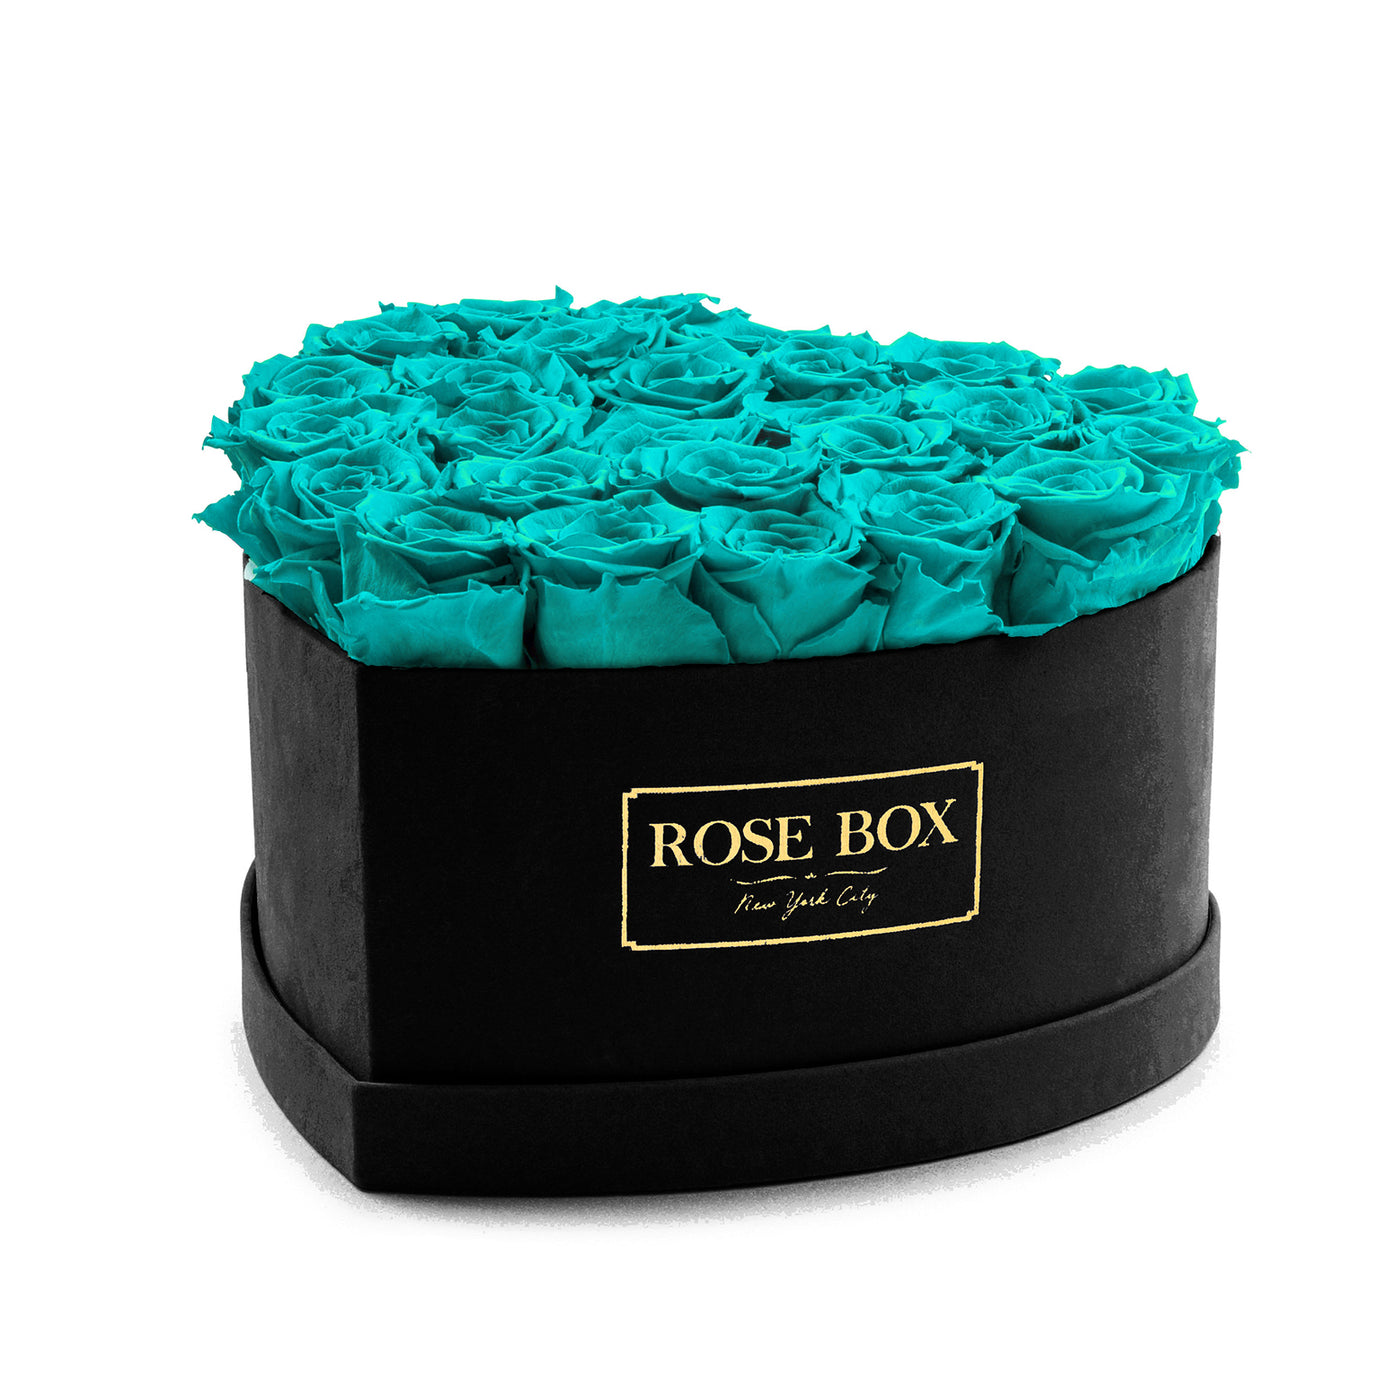 Large Black Heart Box with Turquoise Roses